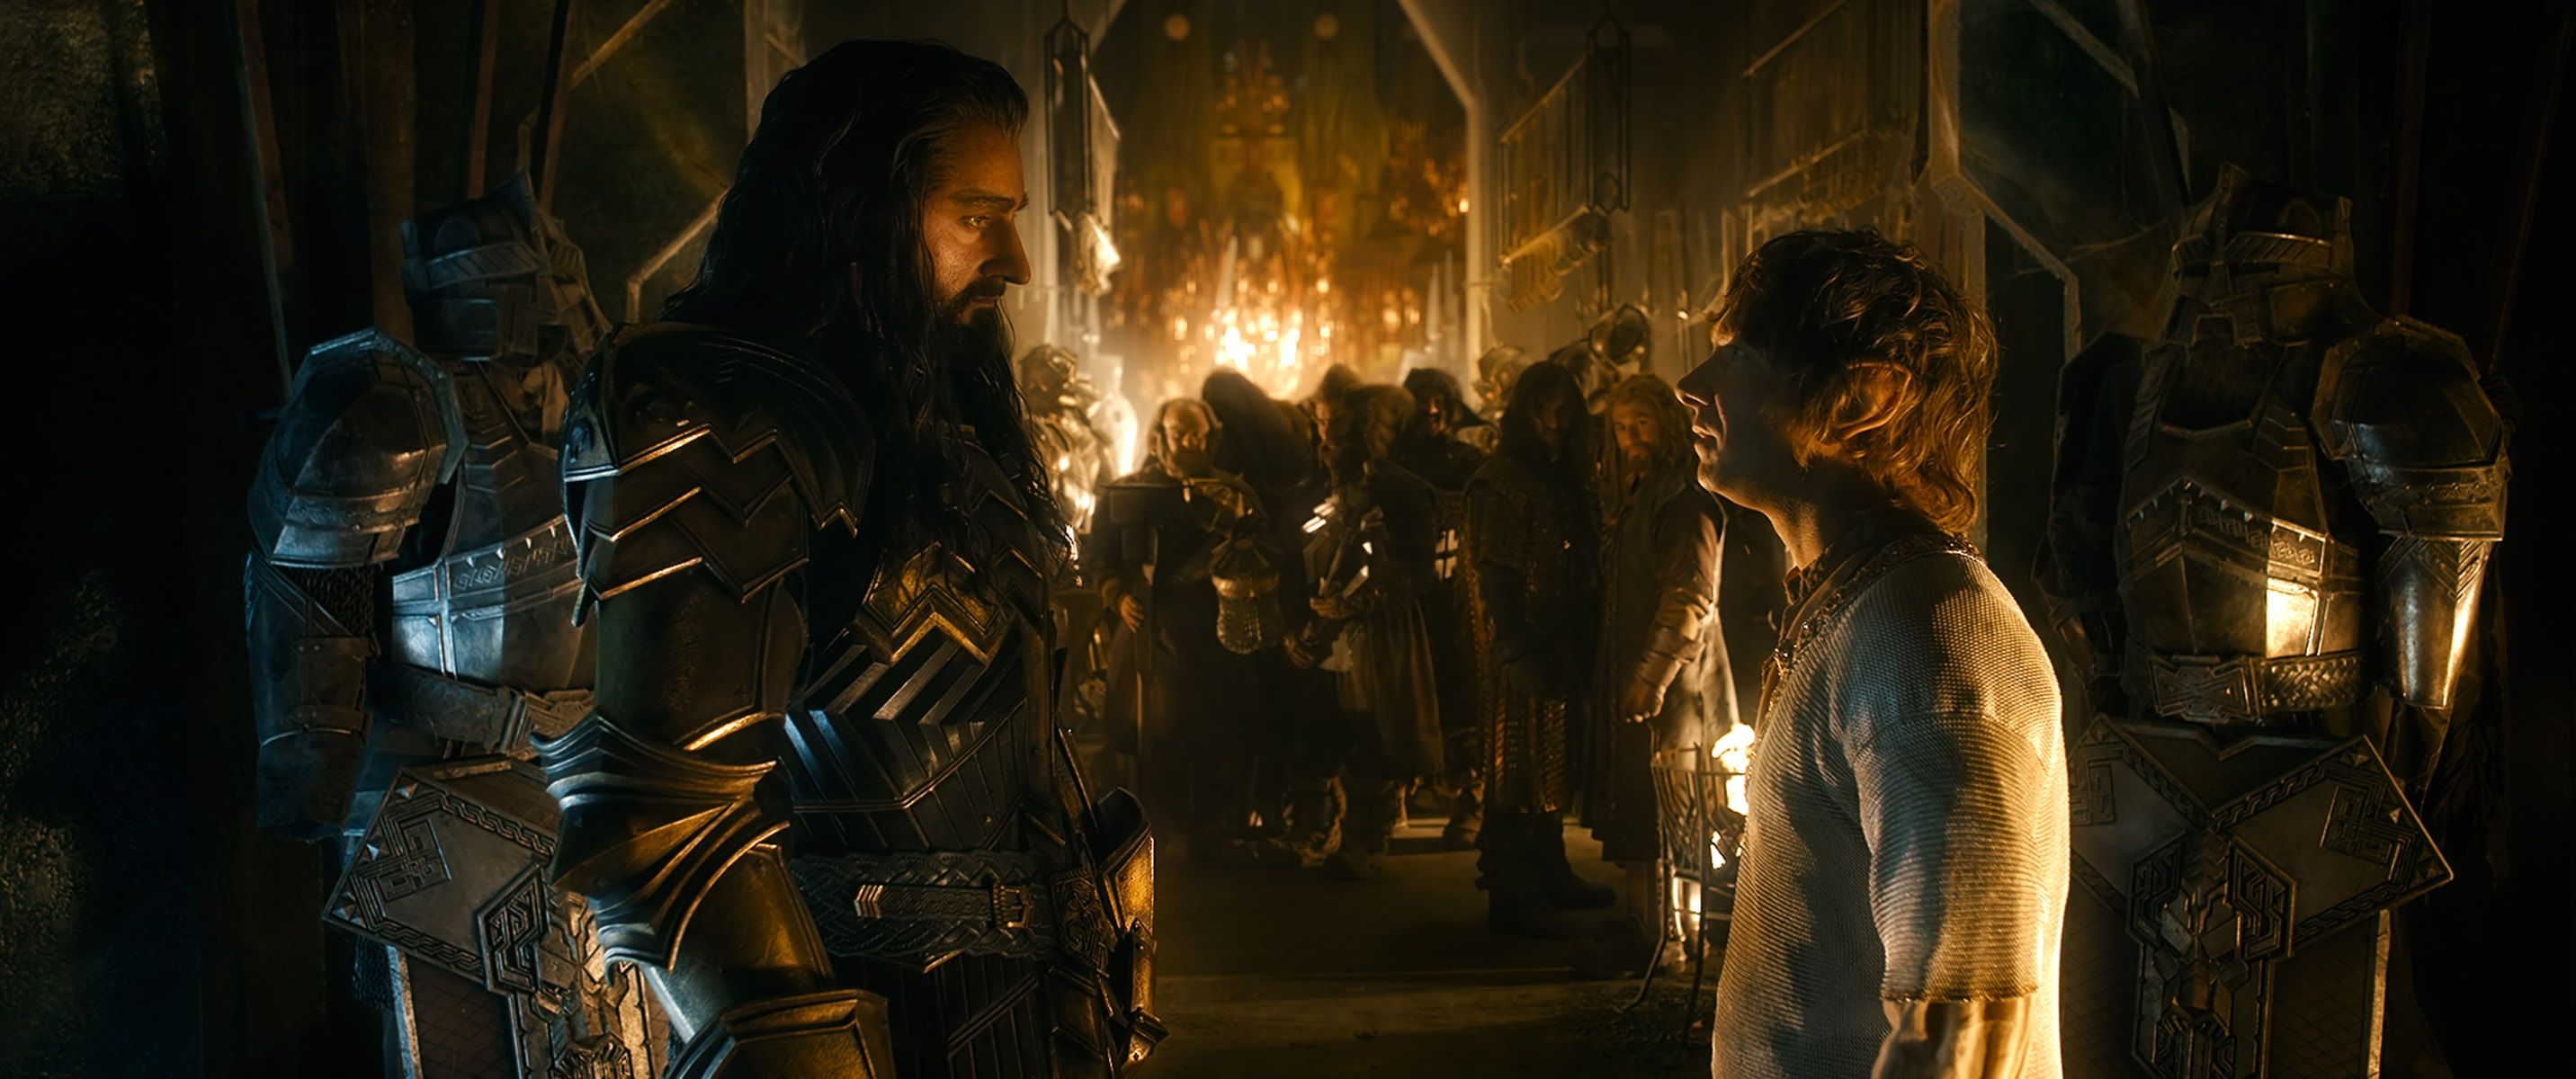 The Hobbit: The Battle of the Five Armies Photo 2